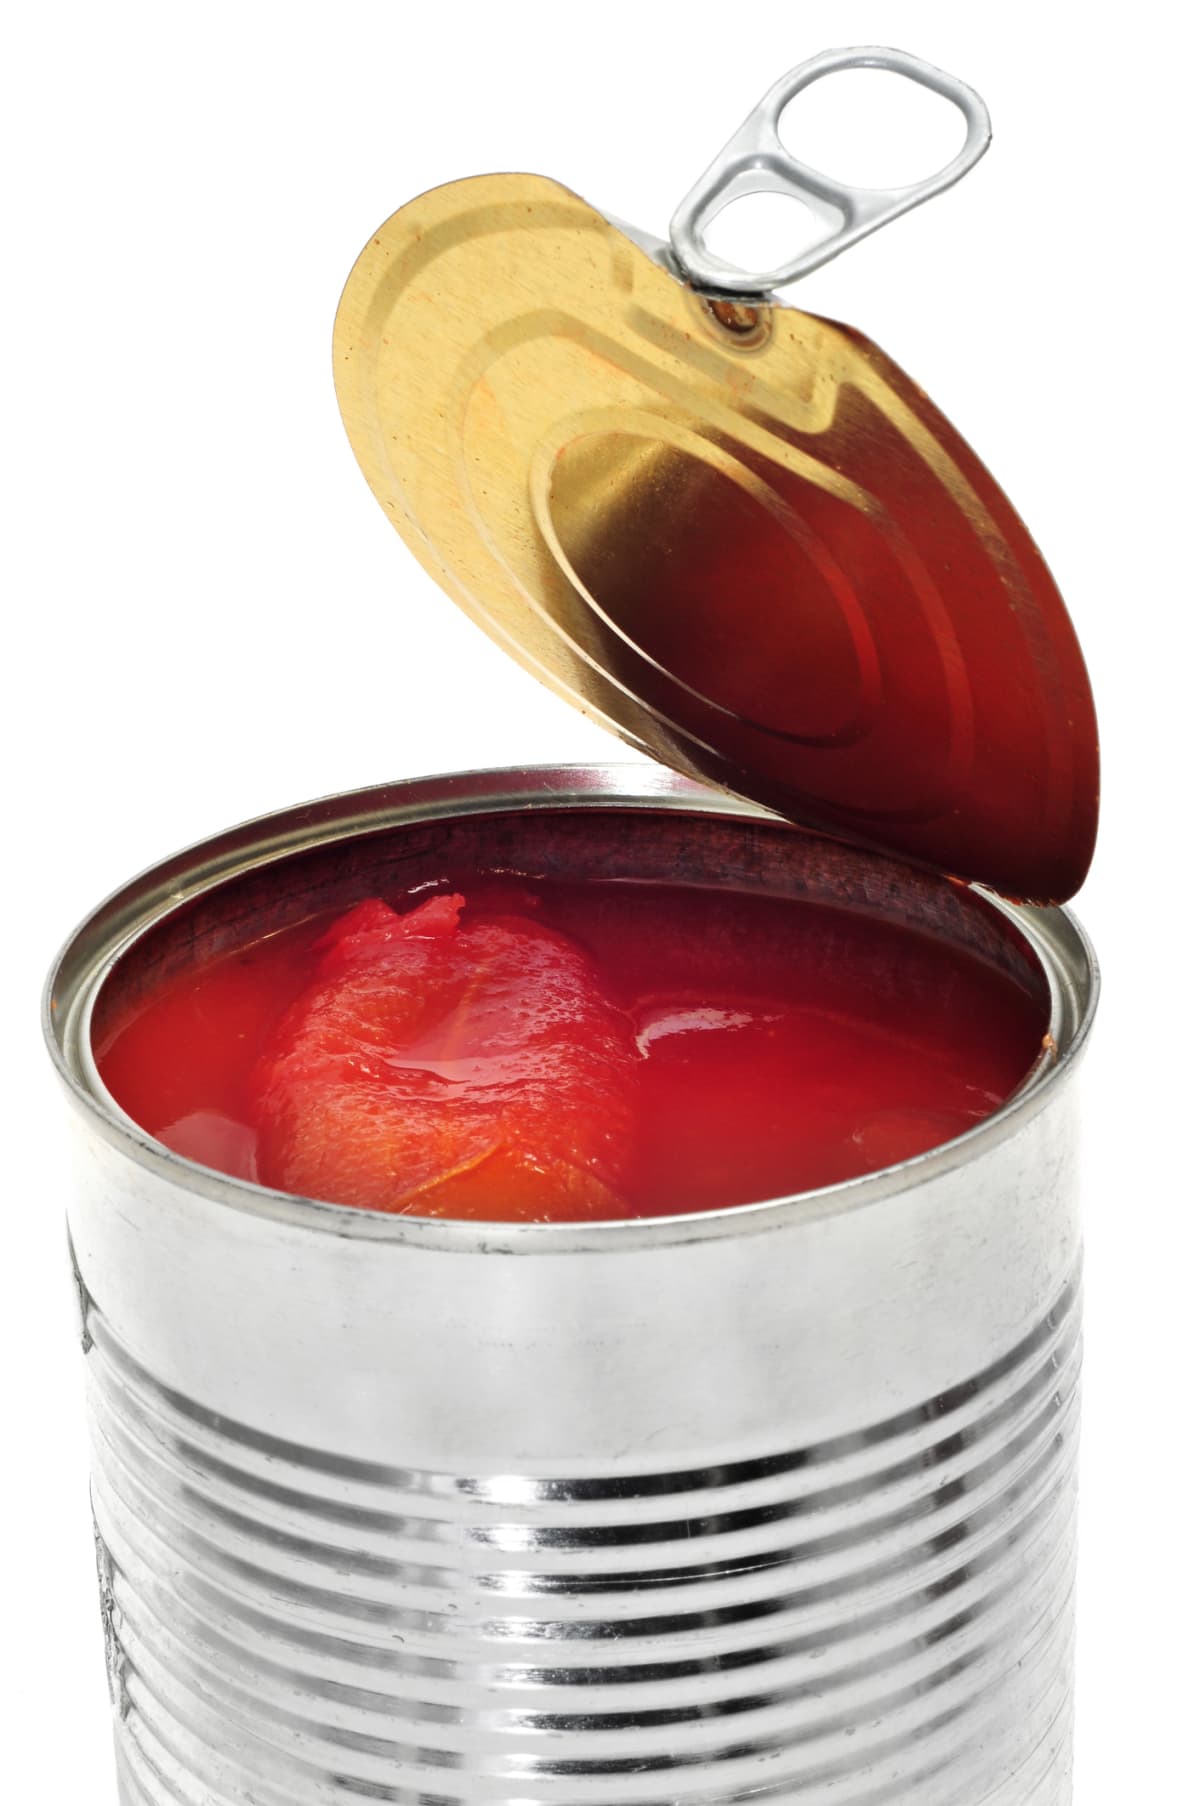 a can of whole peeled tomatoes on a white background